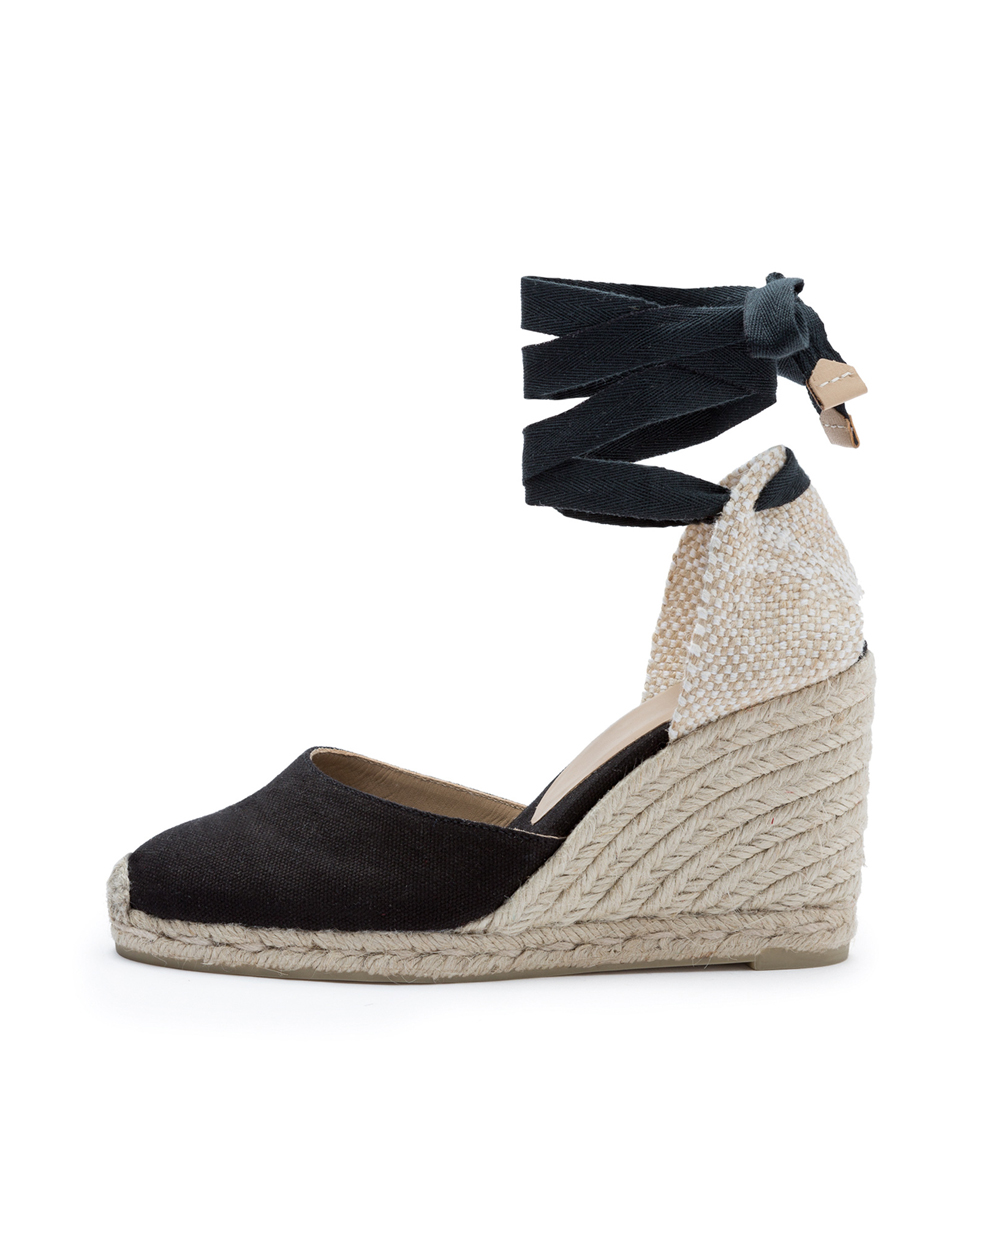 Castaner espadrilles, $249 from RUBY